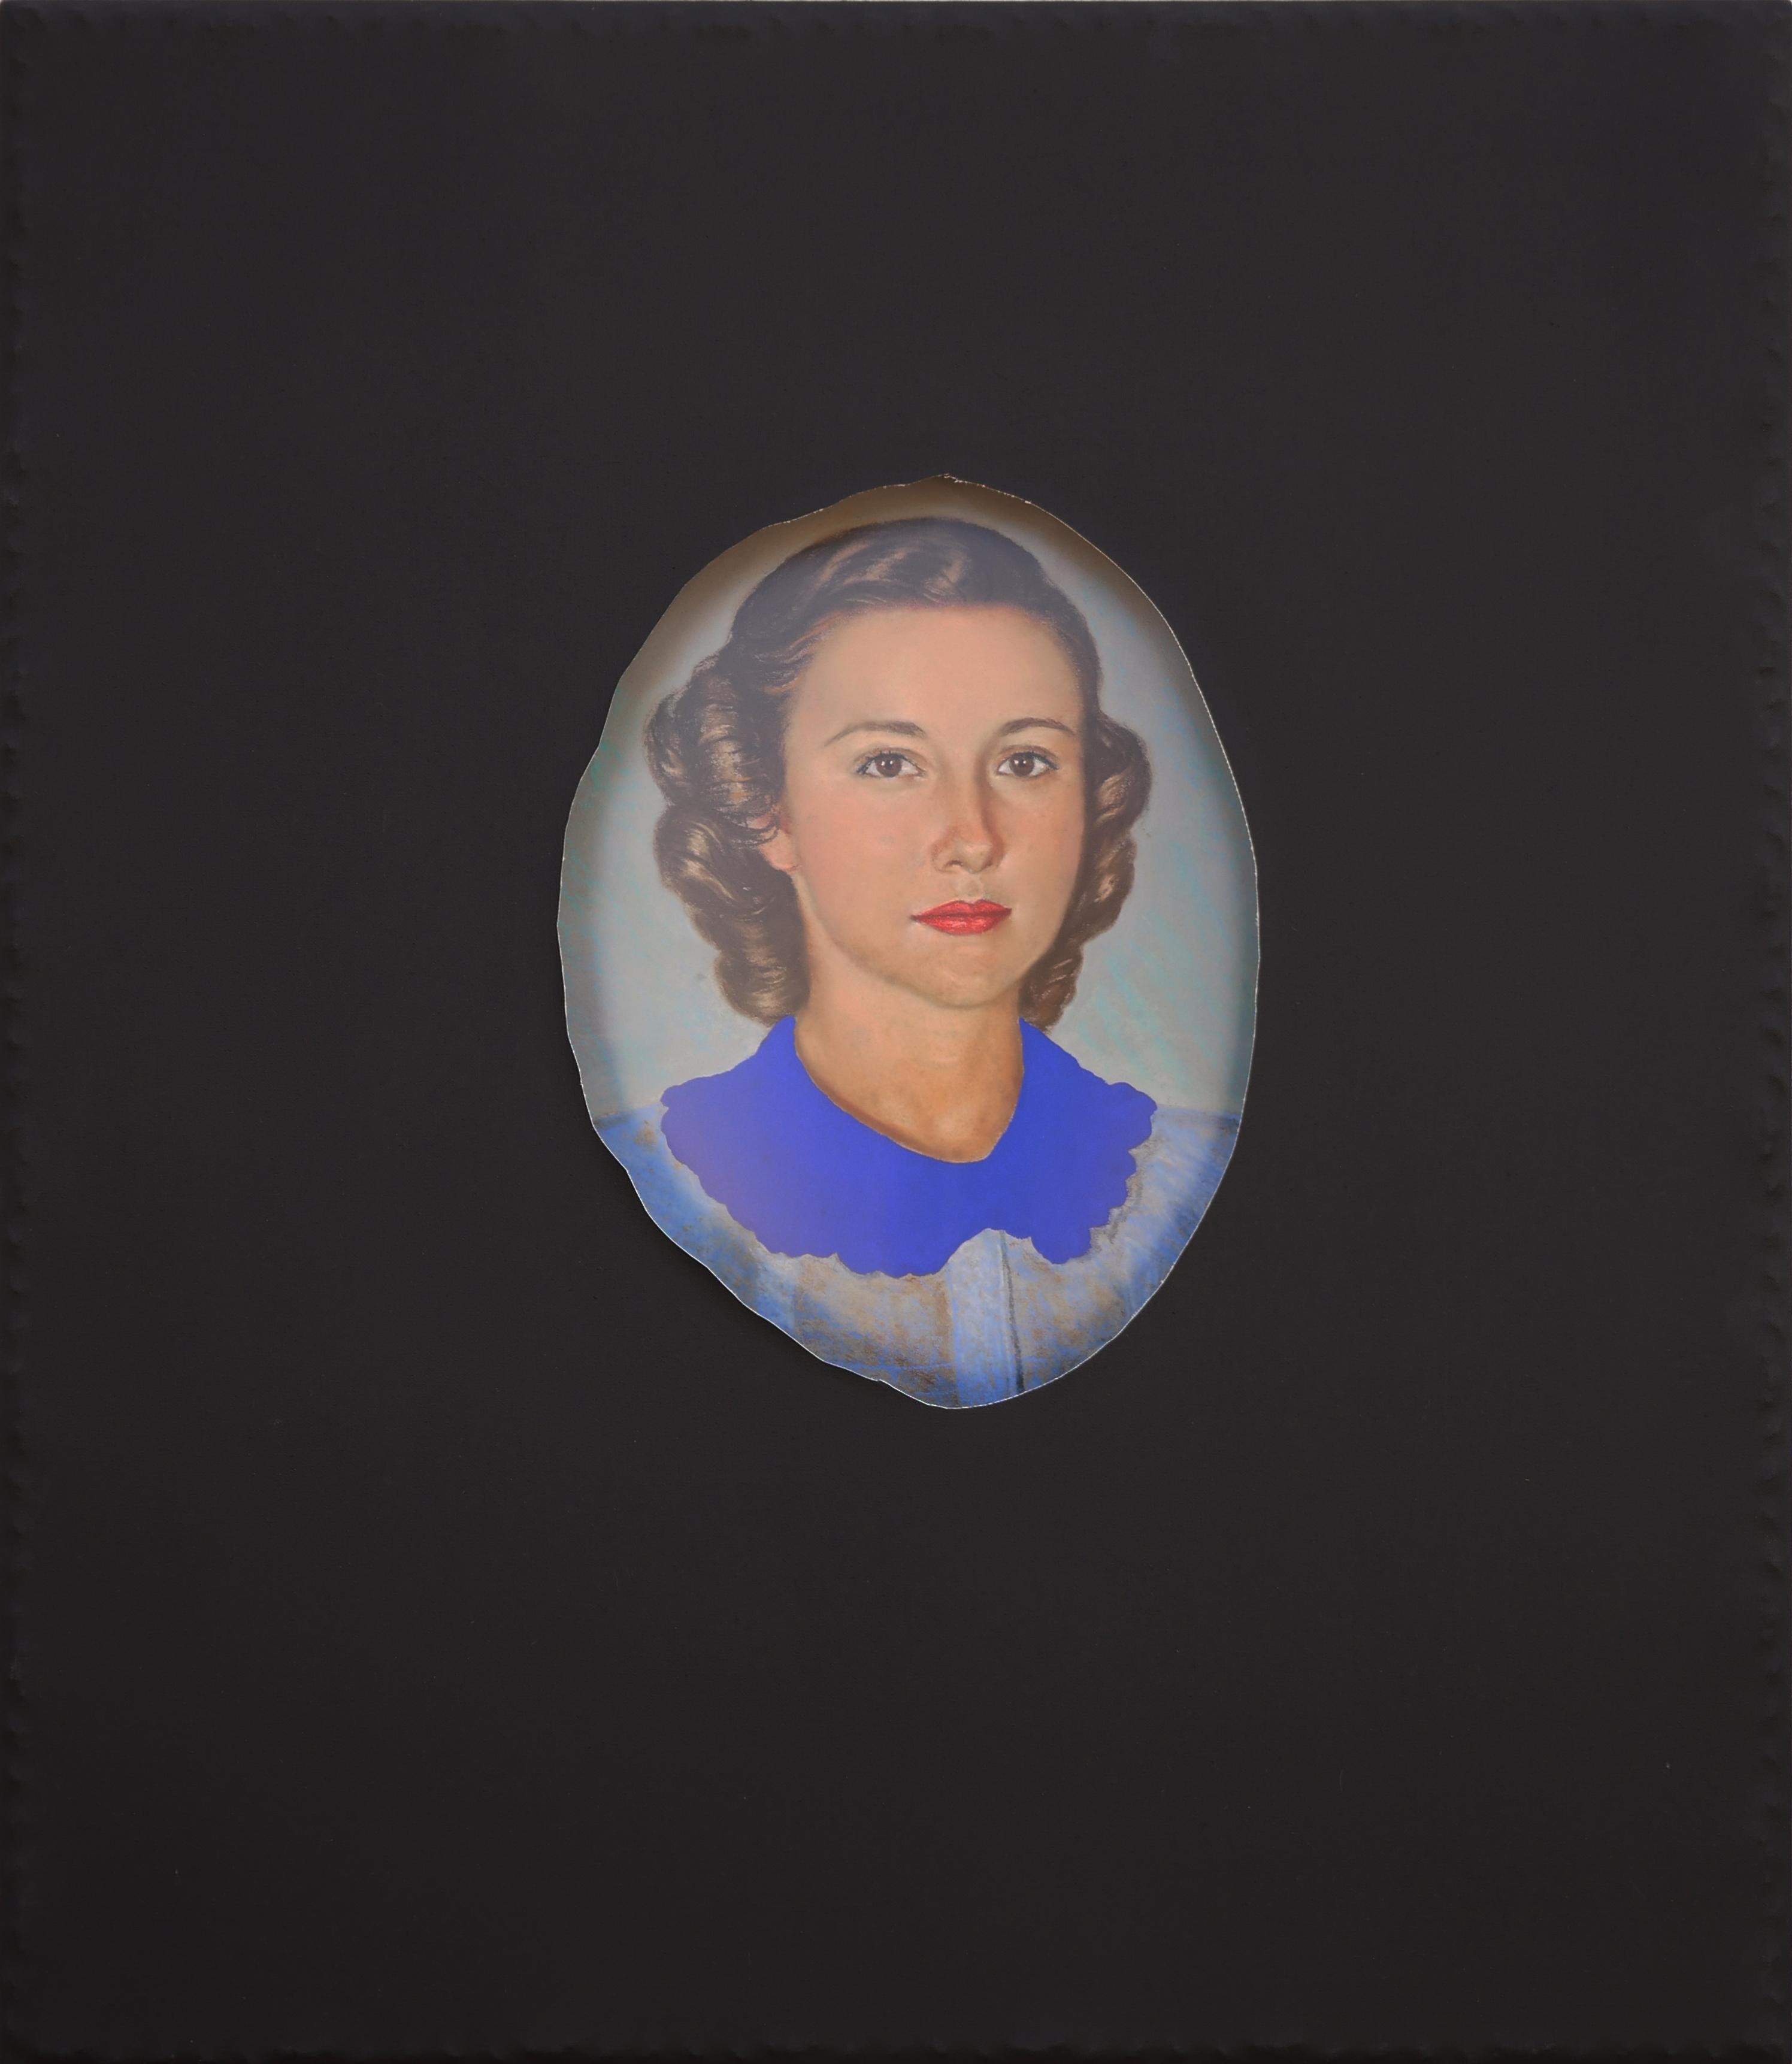 Matthew Reeves Portrait Painting - "Gertrude" Contemporary Black Canvas Wrapped Portrait with Vibrant Blue Collar